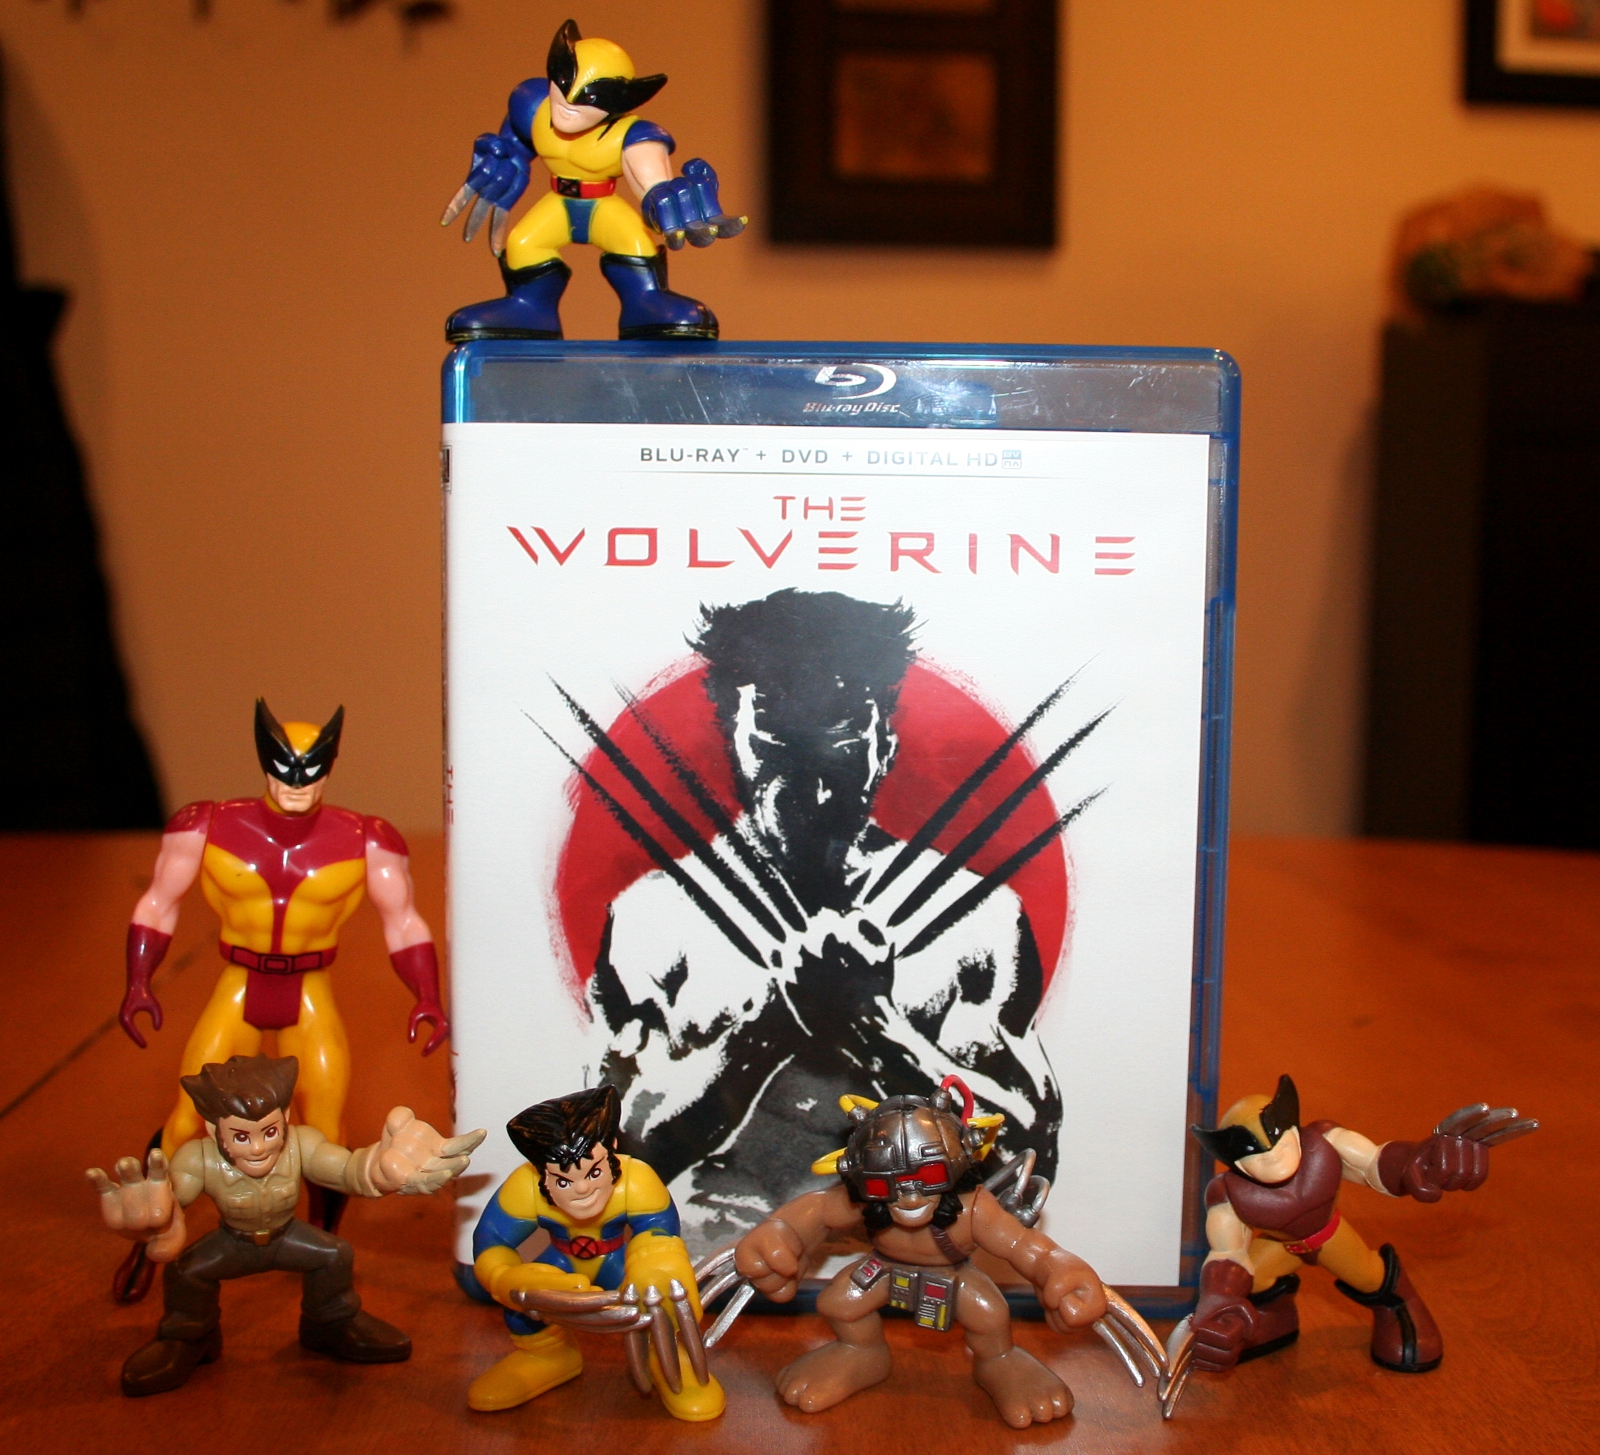 The Wolverine DVD action figures